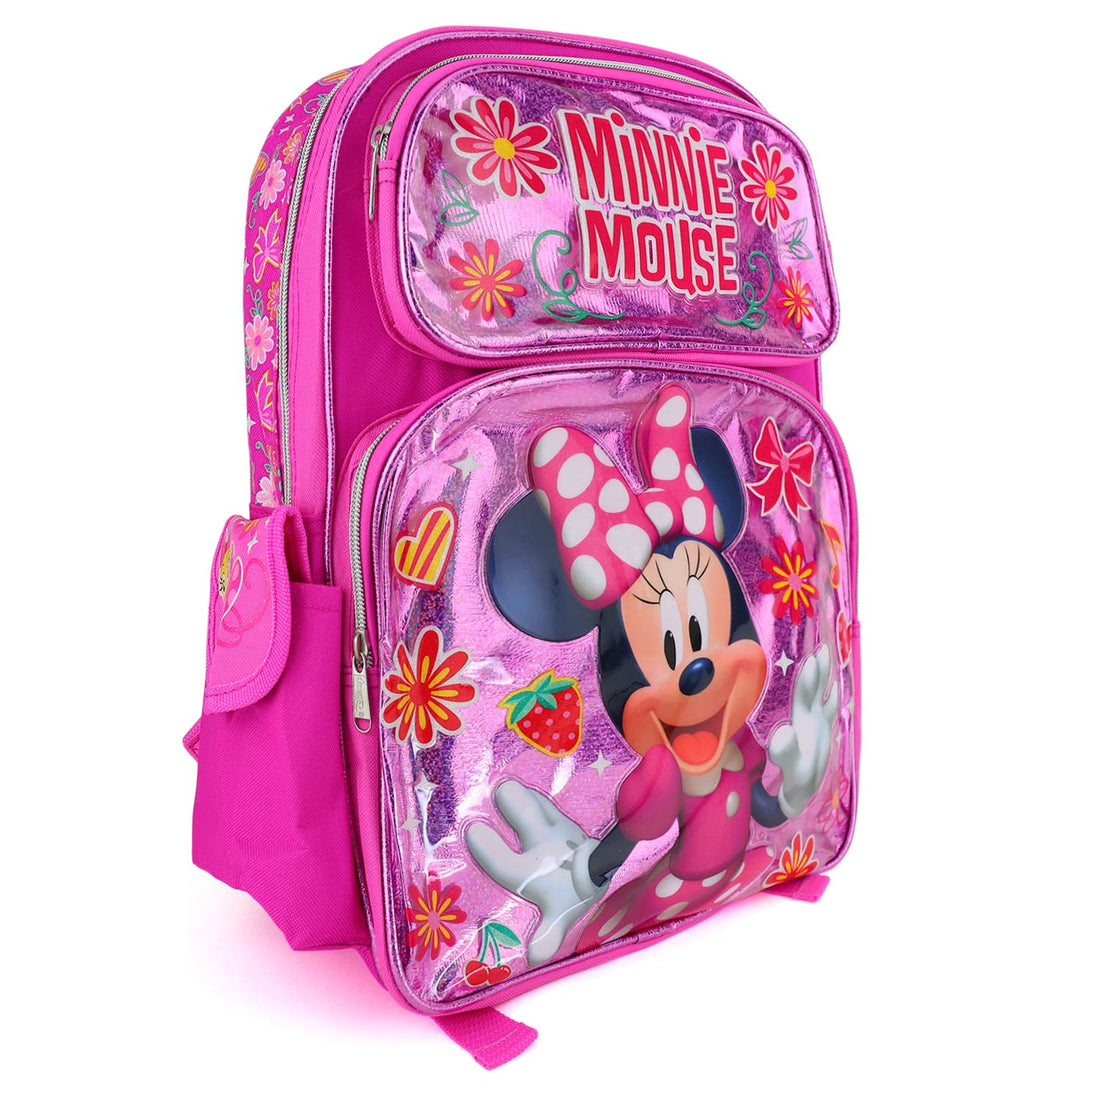 Trendy Apparel Shop Kids Girl's Minnie Mouse Large 16" School Backpack